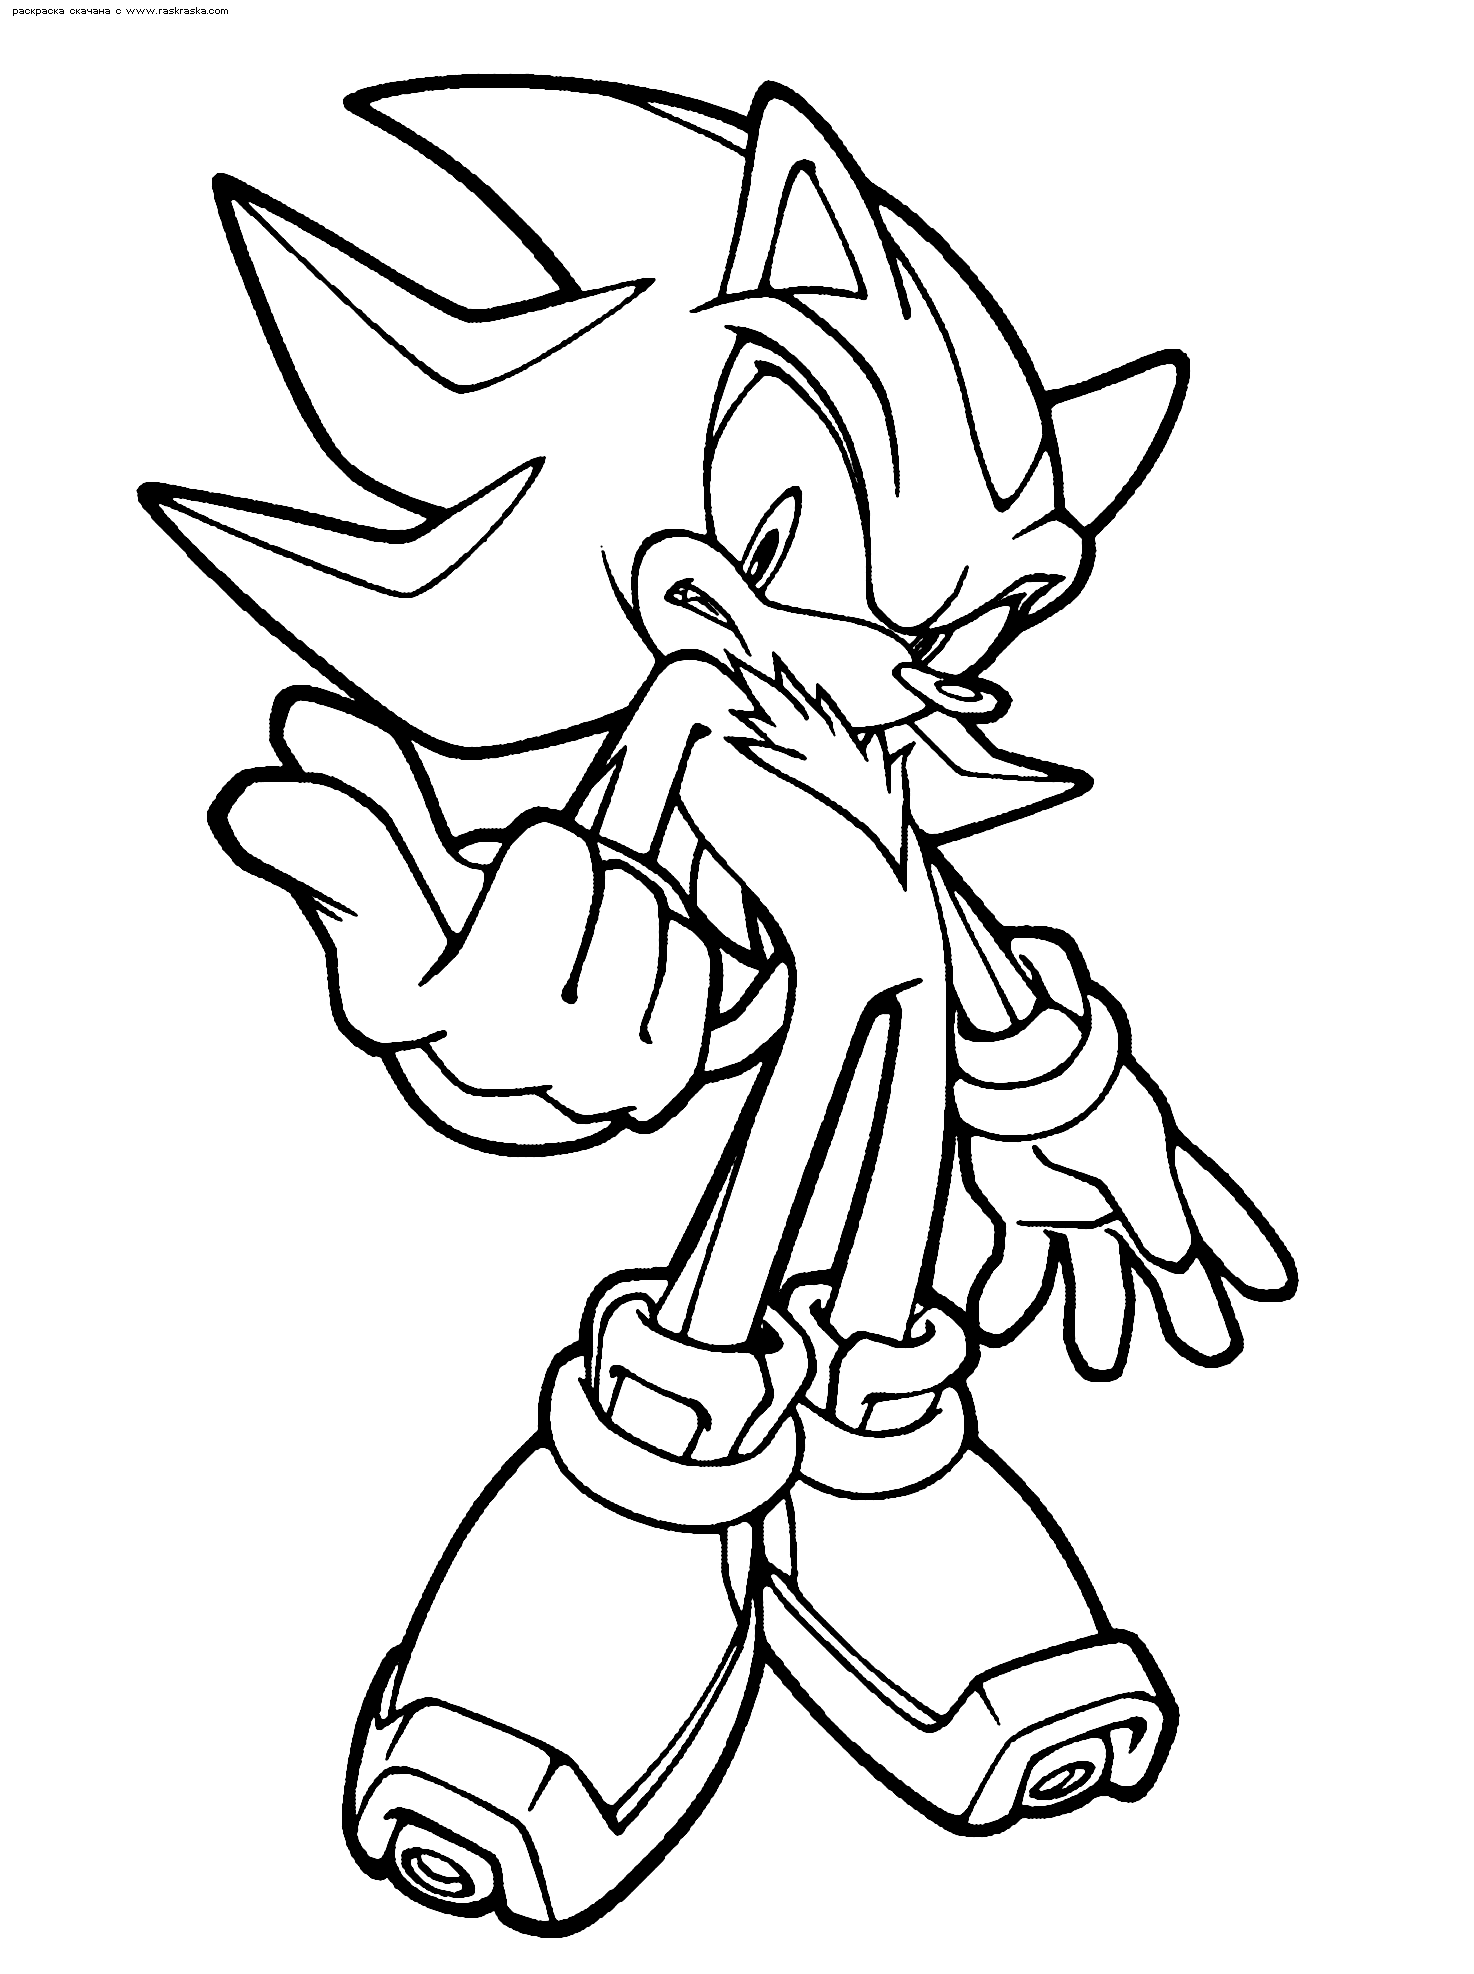 sonic printable coloring pages amazing coloring pages sonic printable coloring pages printable sonic coloring pages 